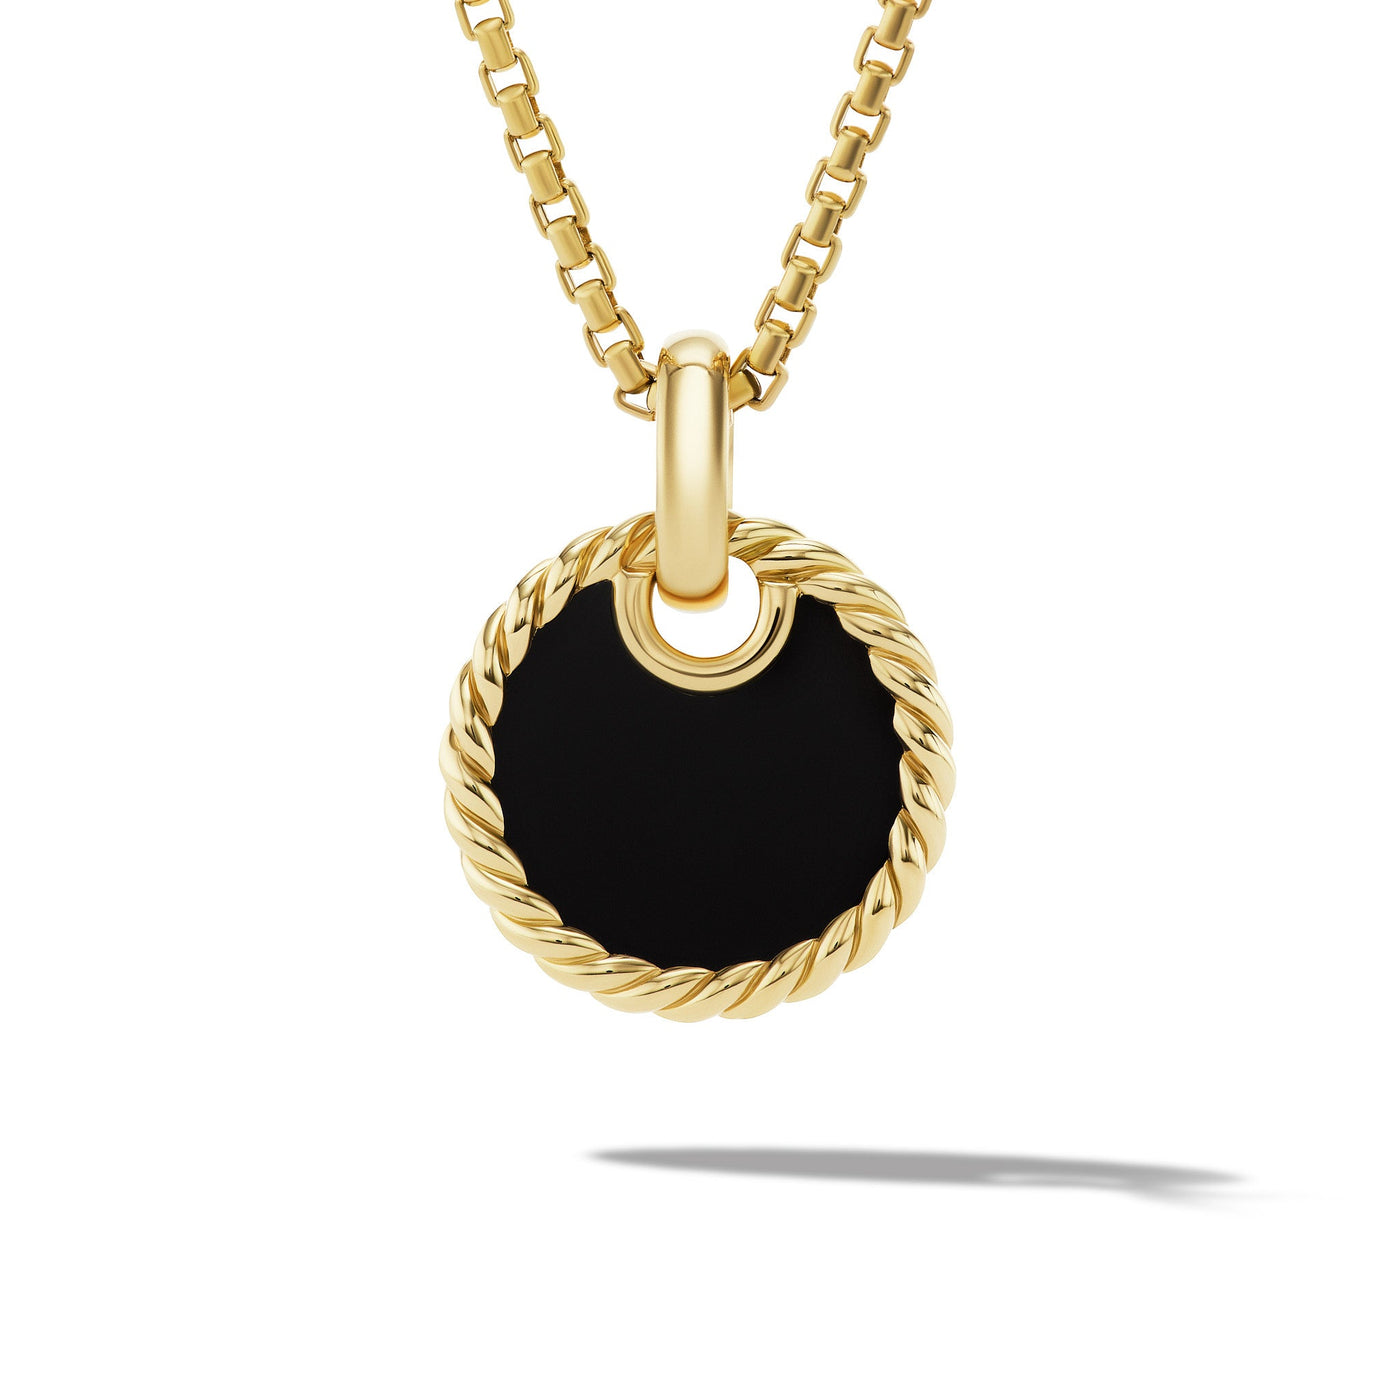 DY Elements® Disc Pendant in 18K Yellow Gold with Black Onyx Reversible to Mother of Pearl\, 15.5mm